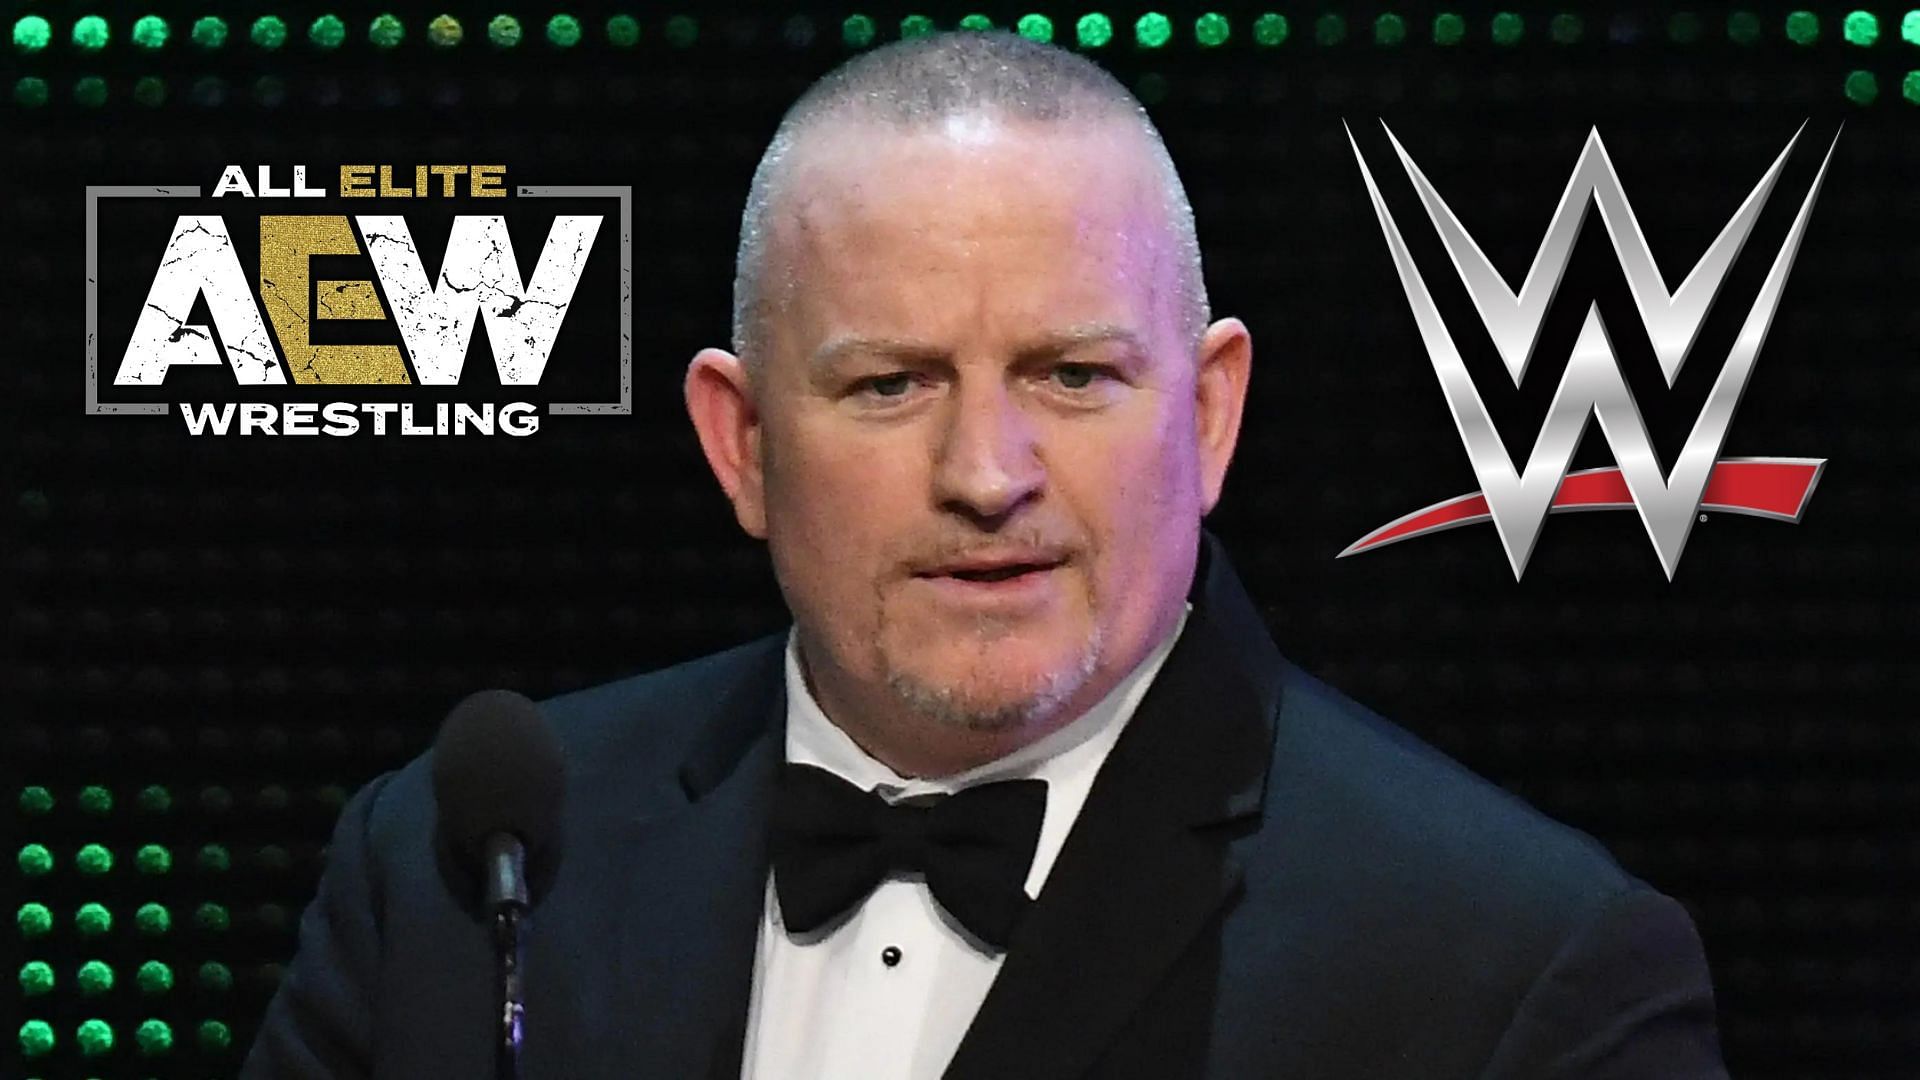 Road Dogg made some interesting comments this week